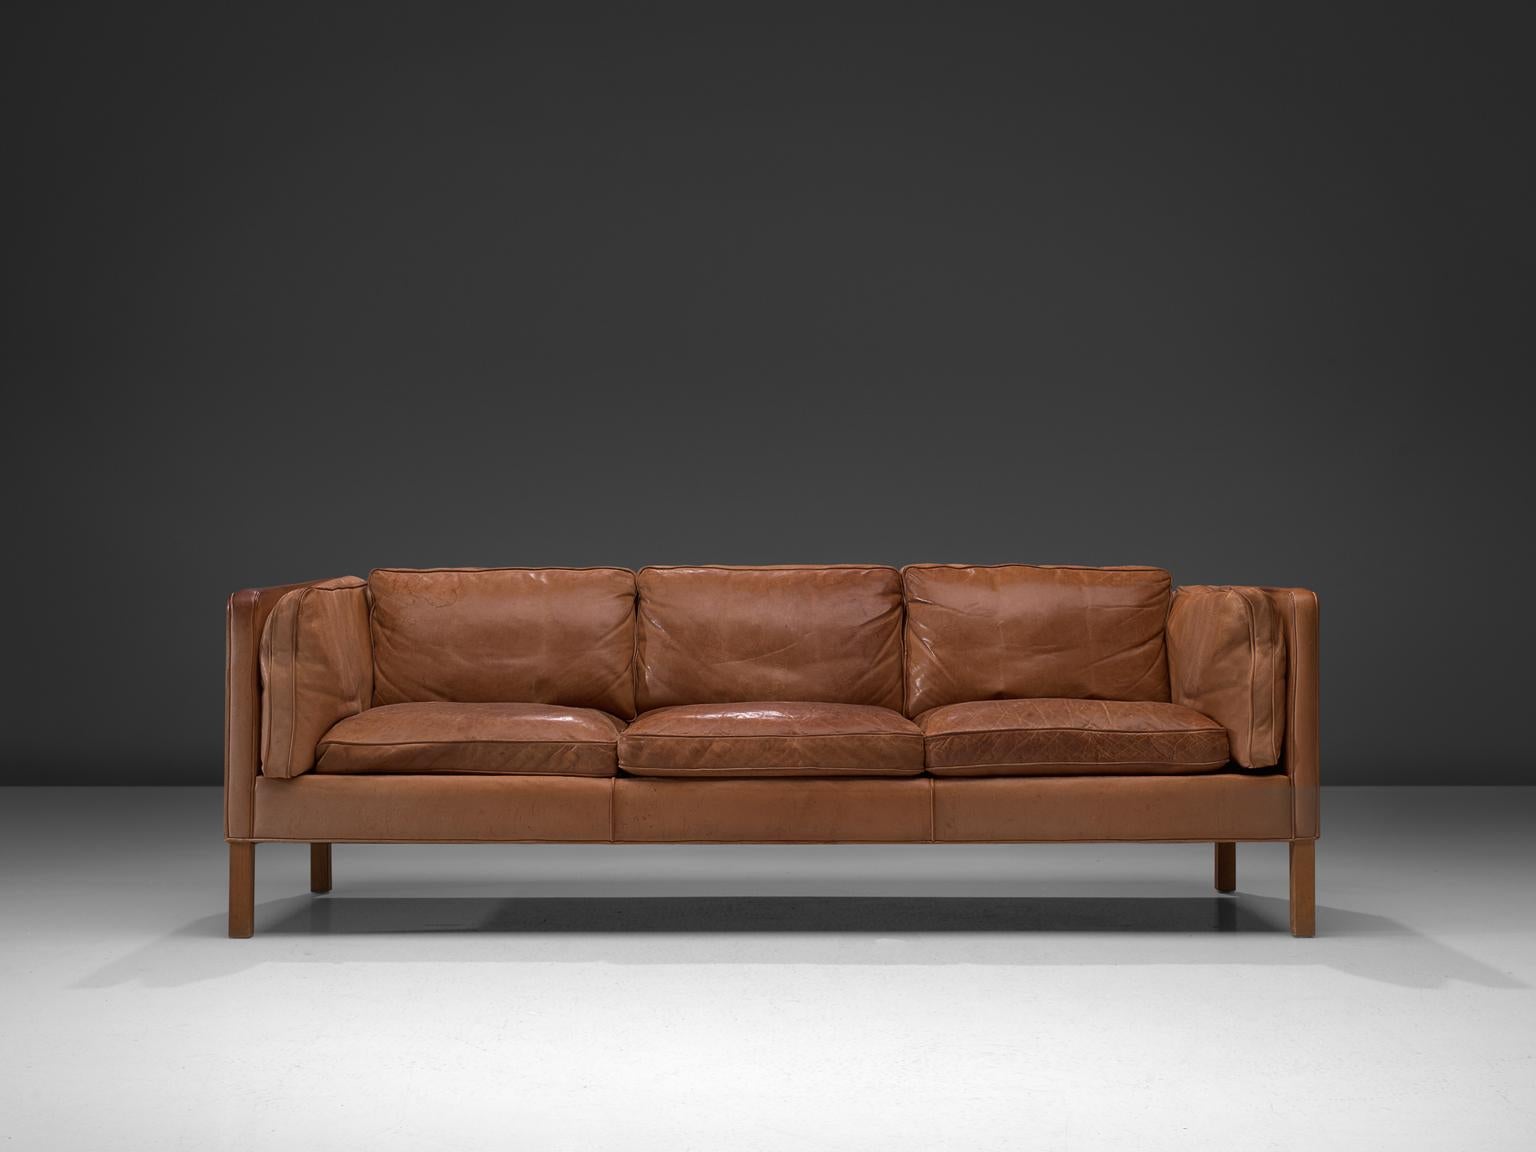 Three-seat sofa, cognac leather and oak, Denmark, 1960s.

This design comes from the 1960s and has wonderful shapes and comfort. The three-seat sofa comes with loose cushions in seating, back and sides. They are stuffed with fluff and show a nice